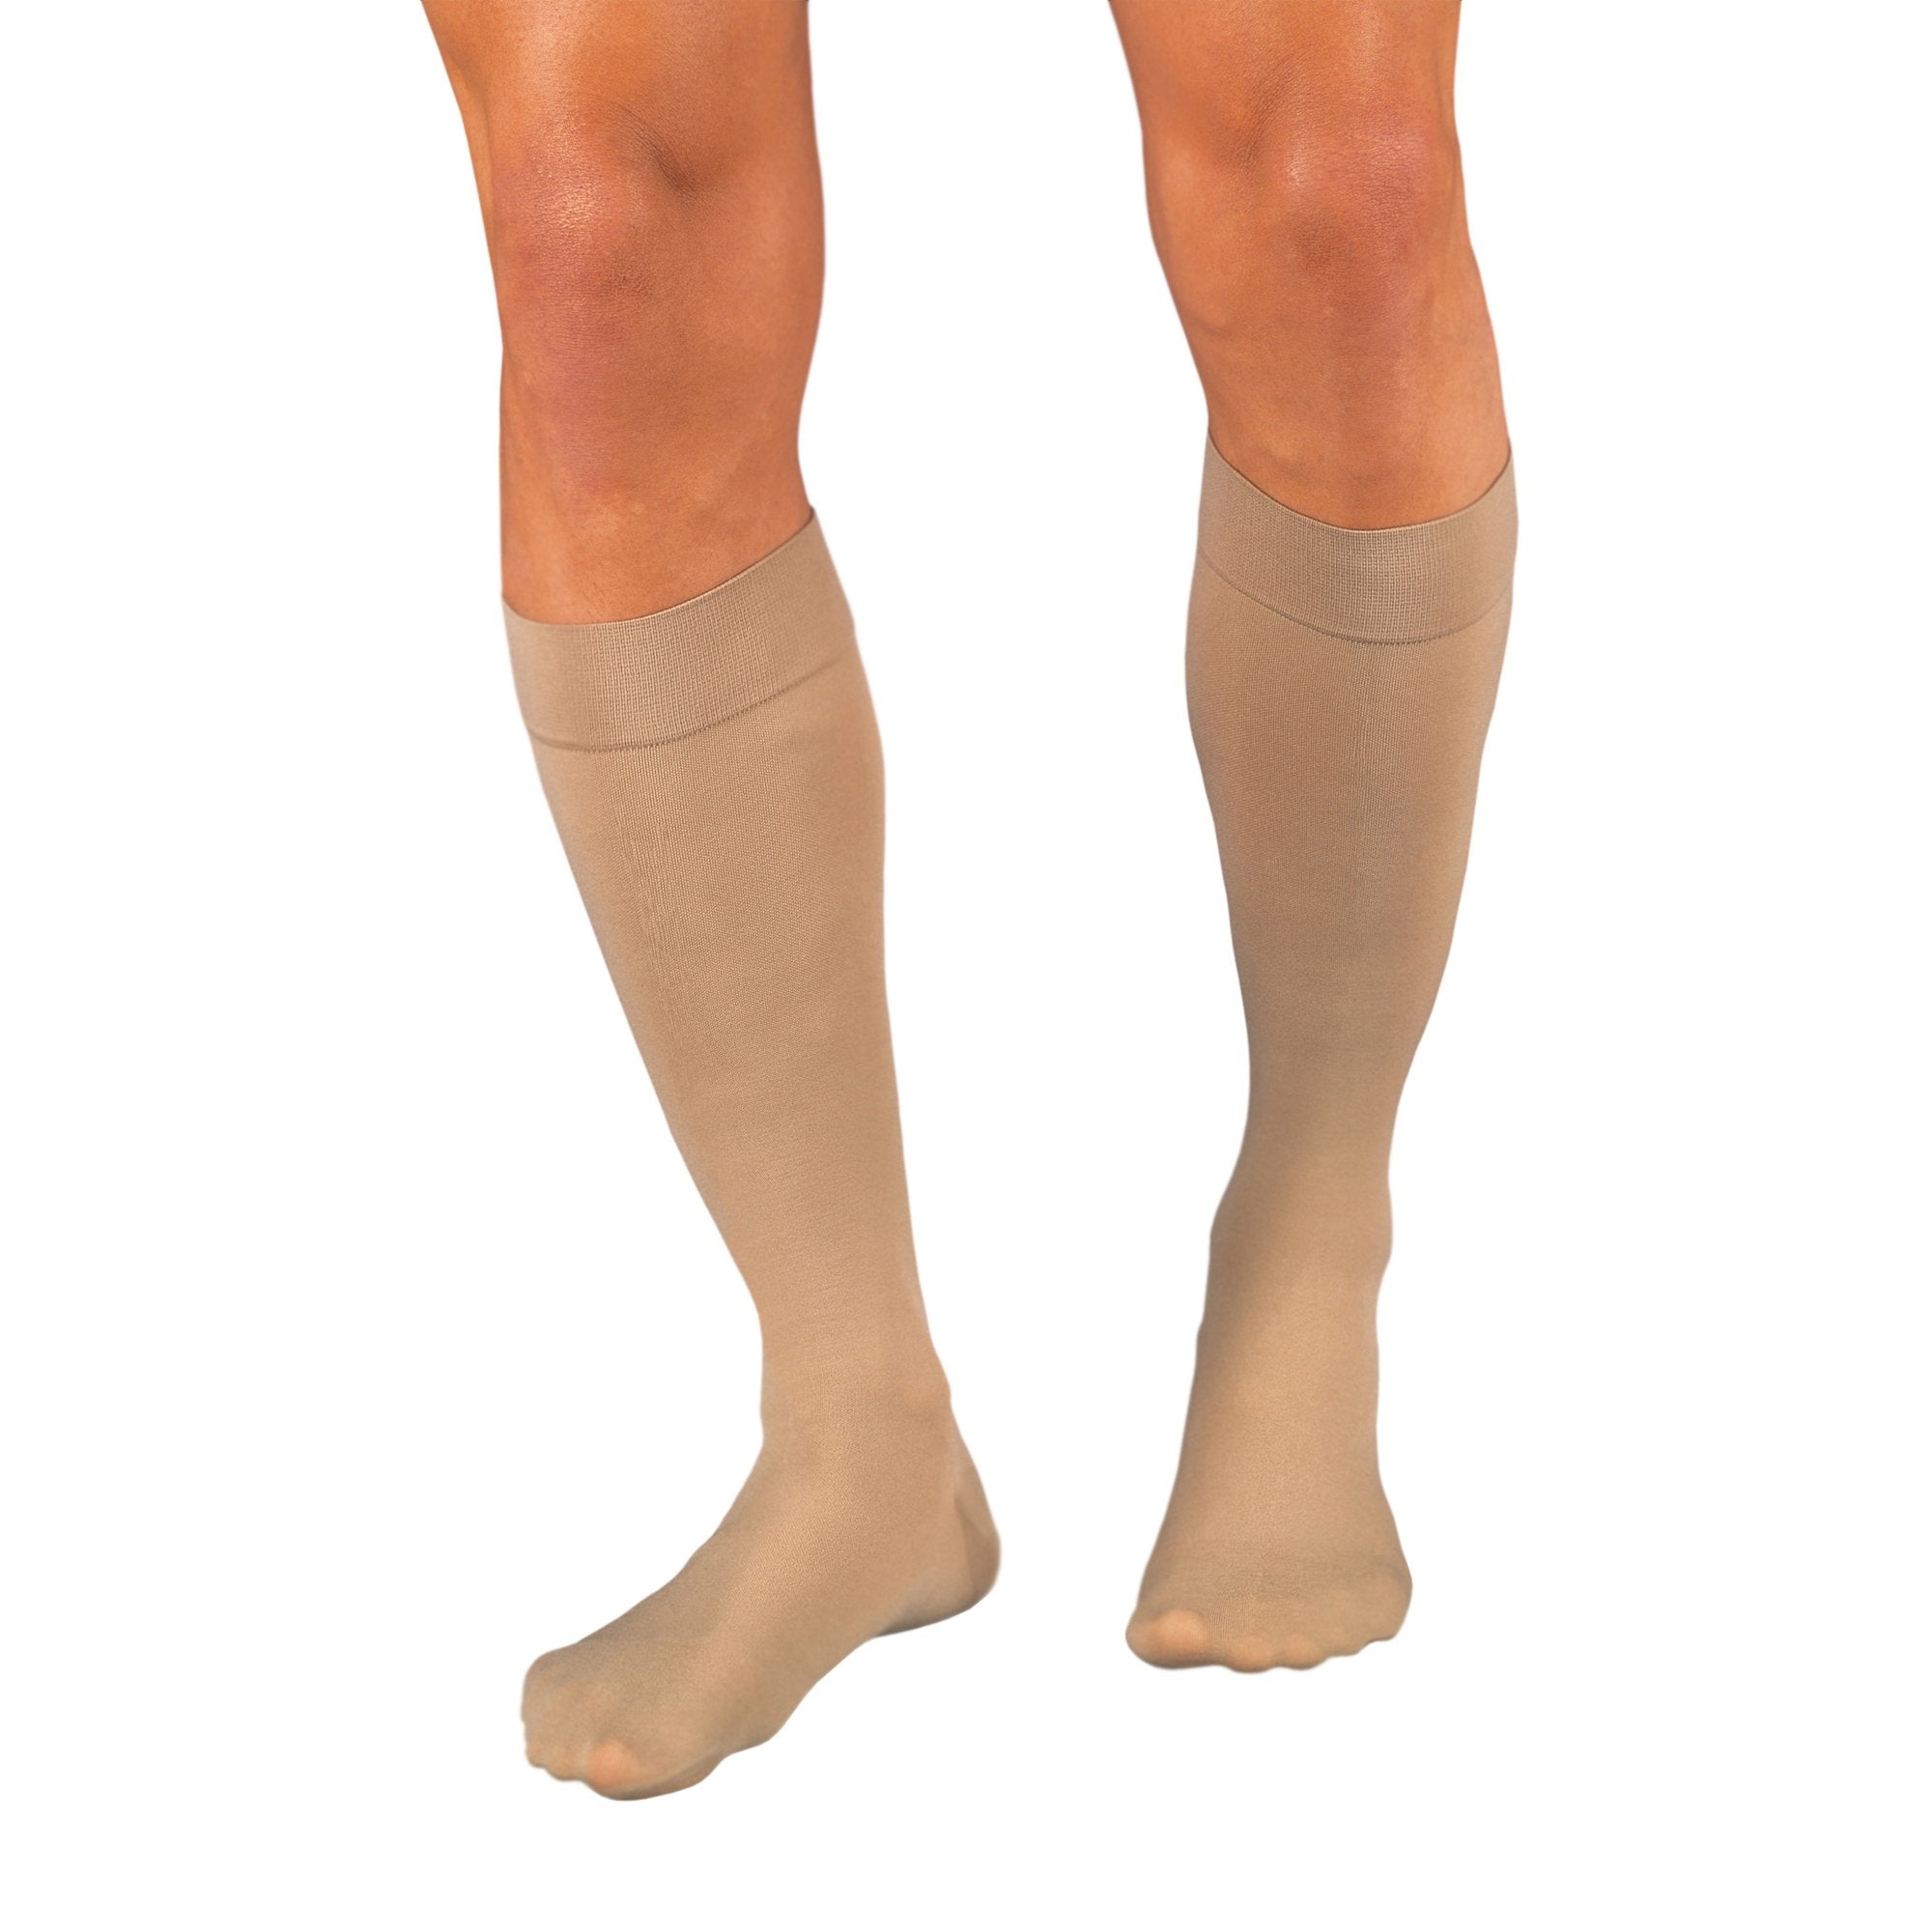 Compression Stocking JOBST Relief Knee High Large Beige Closed Toe